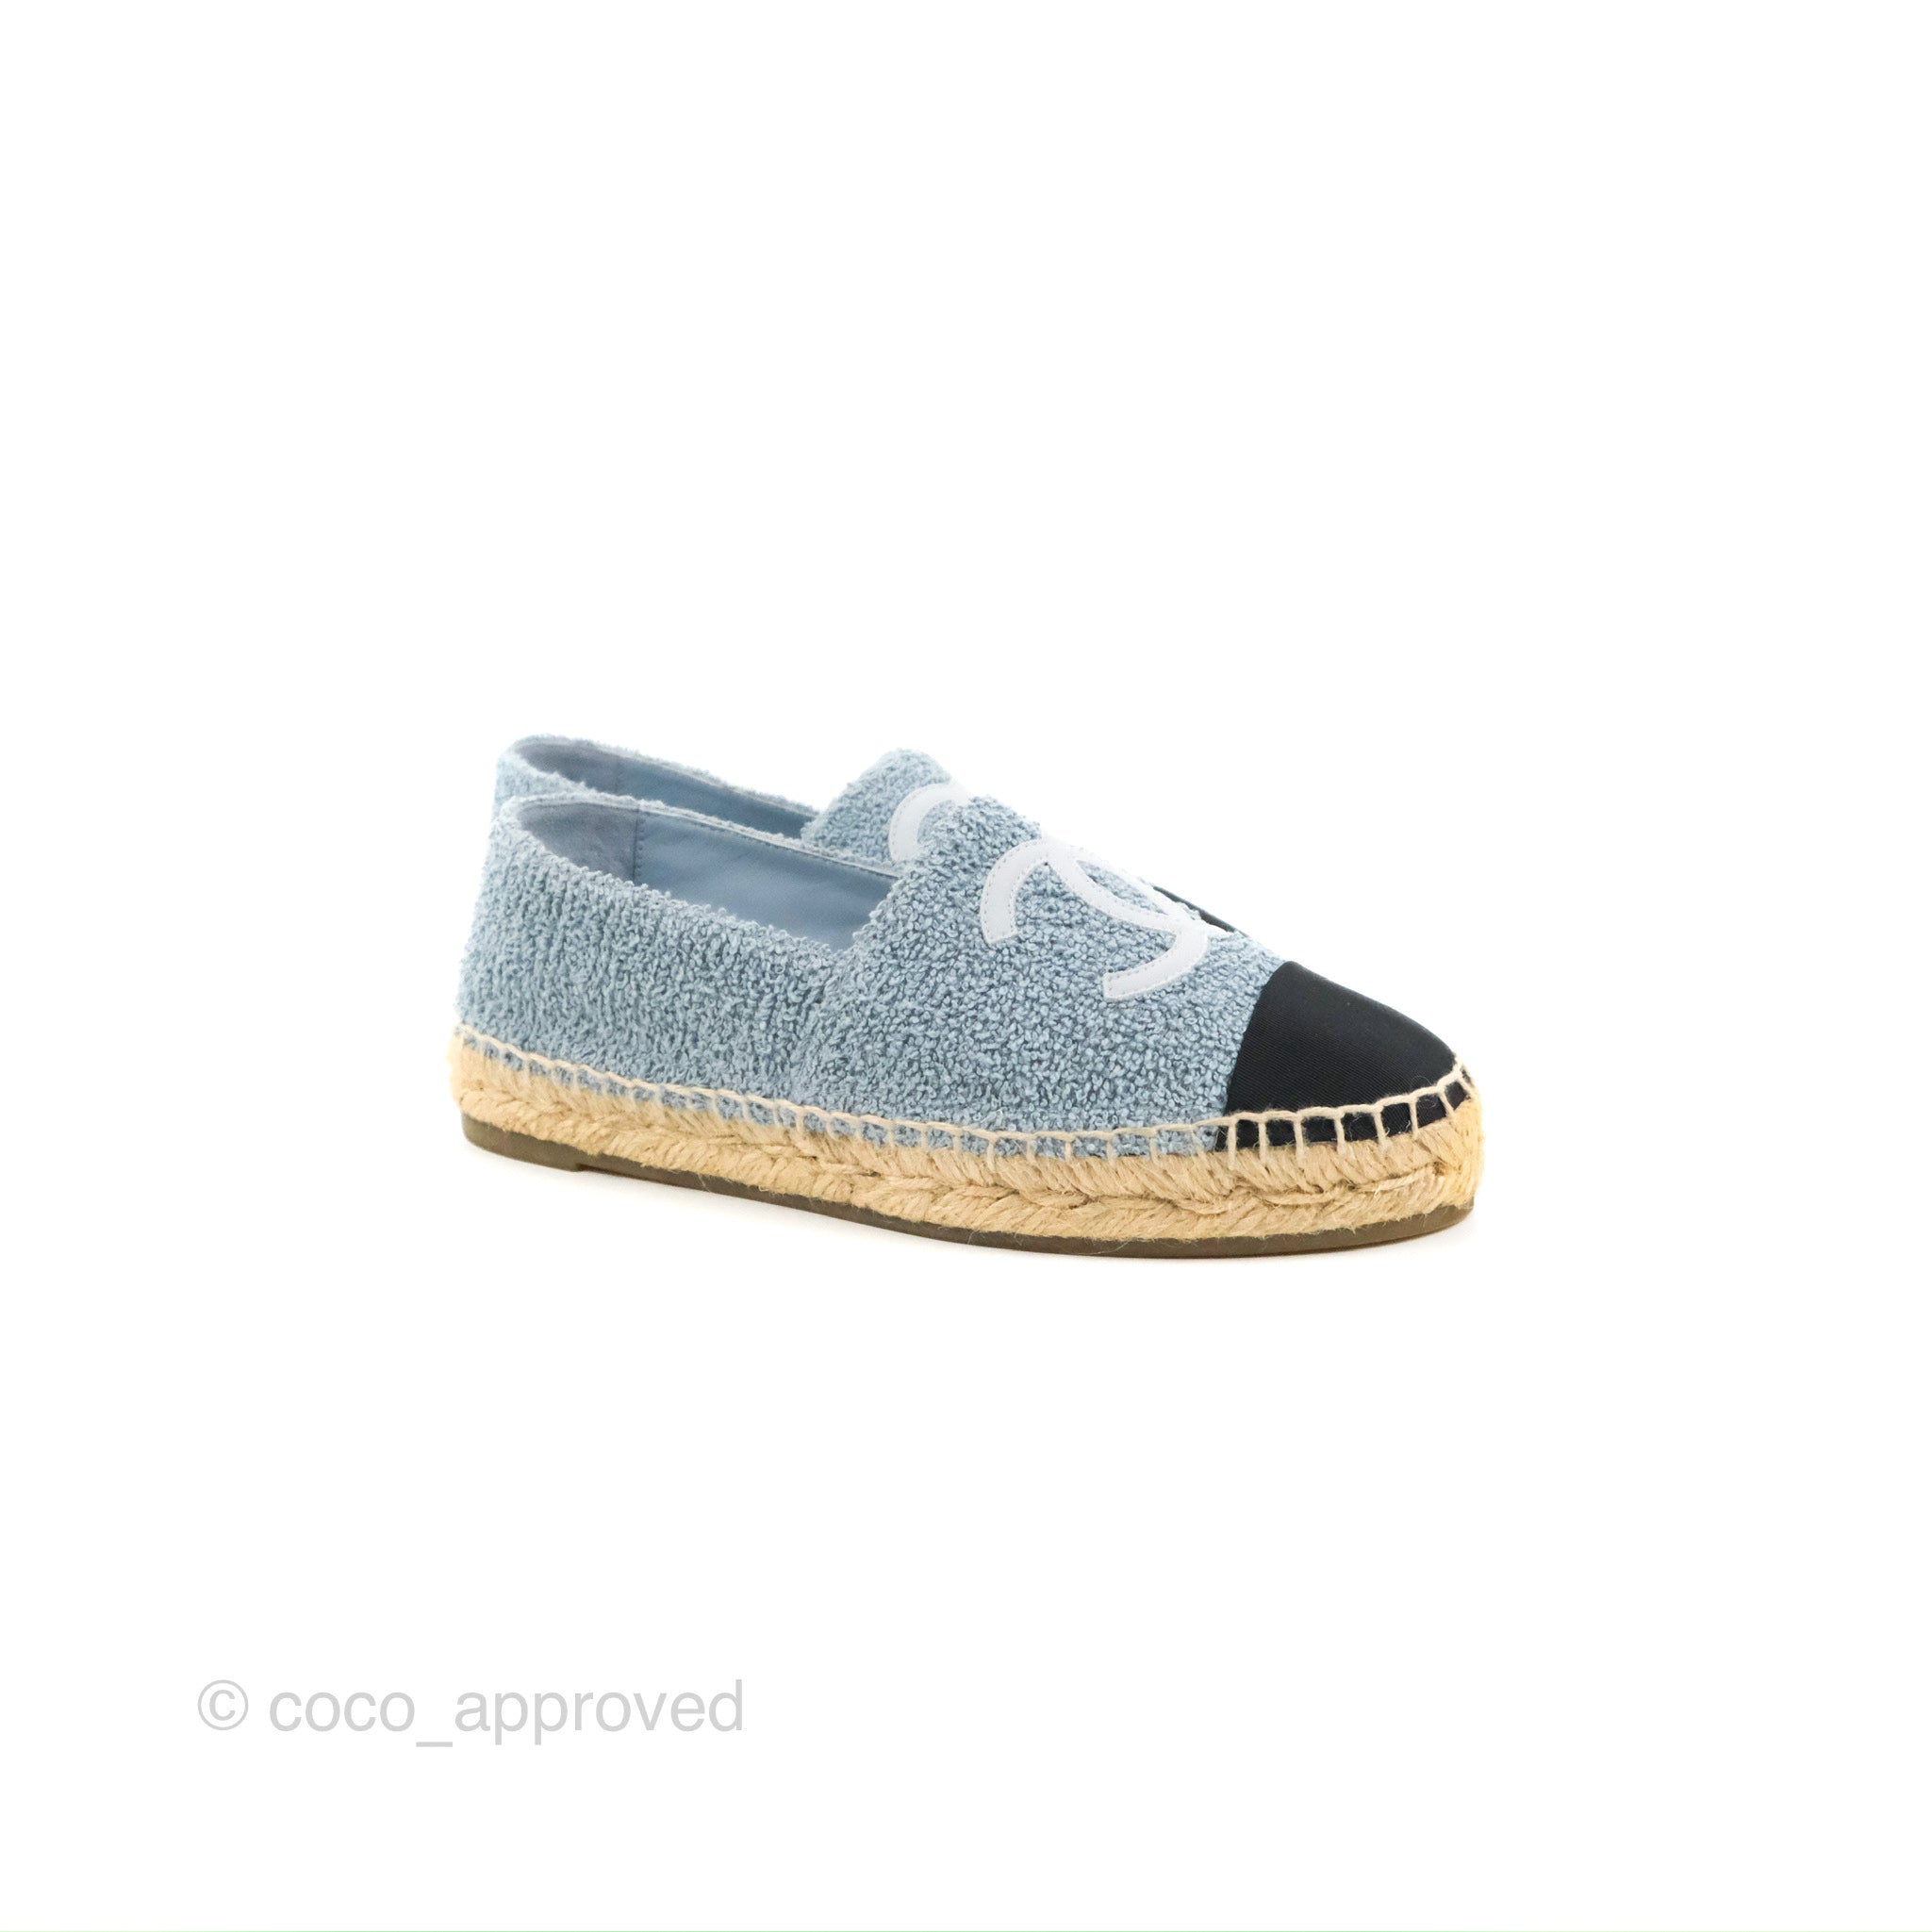 Chanel Espadrille Black Blue Tweed Size 37 – Coco Approved Studio